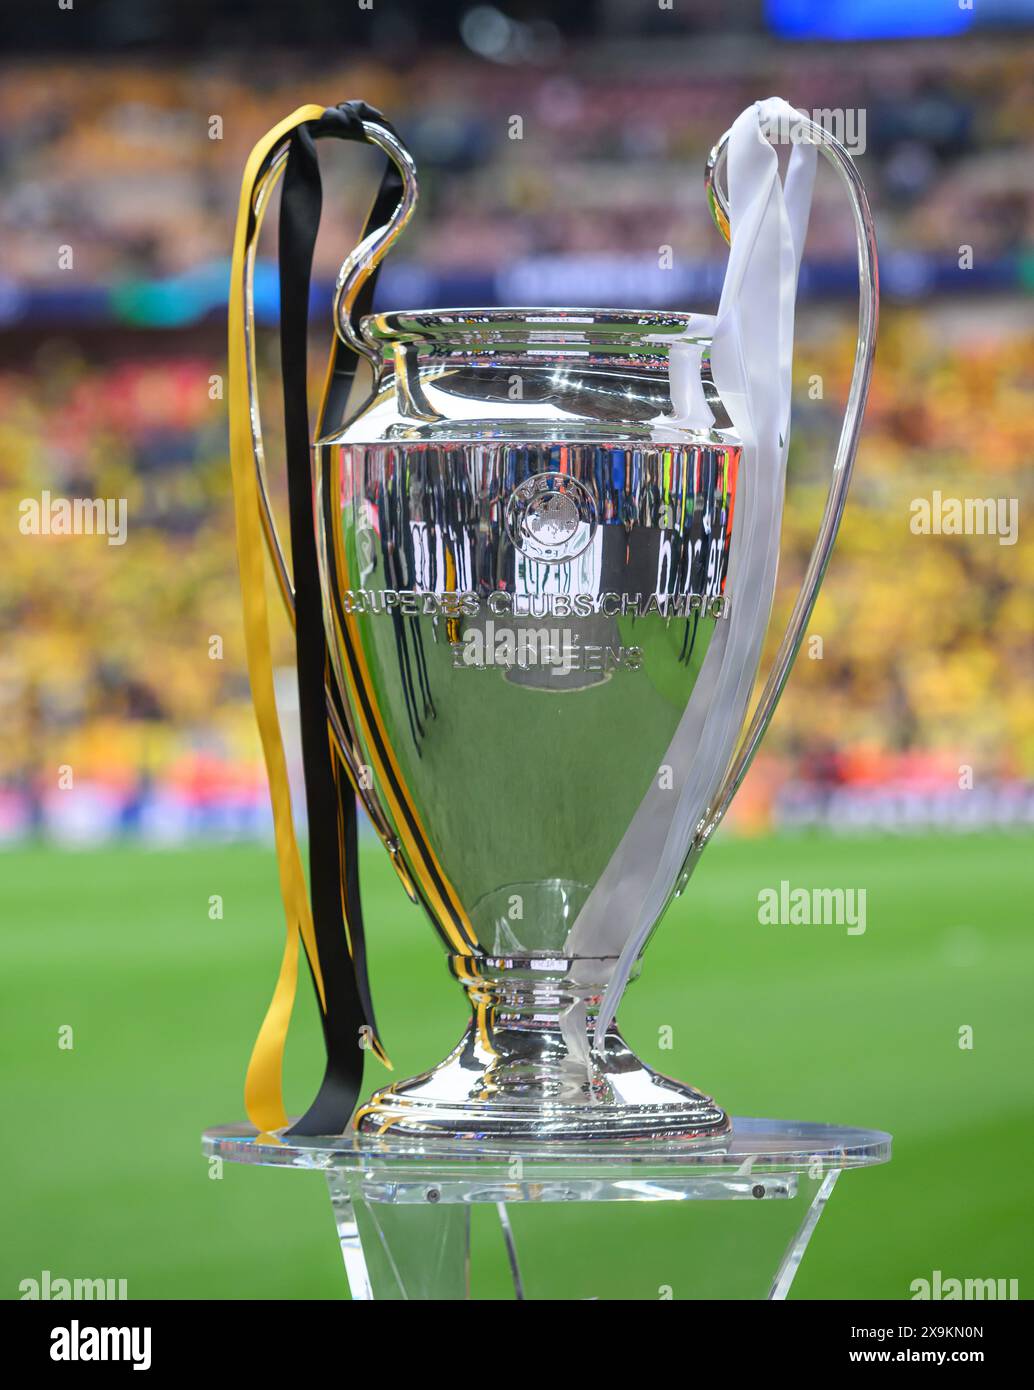 London, UK. 01 Jun 2024 - Borussia Dortmund v Real Madrid - UEFA Champions League Final - Wembley. The Champions League Trophy on display before the 2024 final in London. Picture : Mark Pain / Alamy Live News Stock Photo